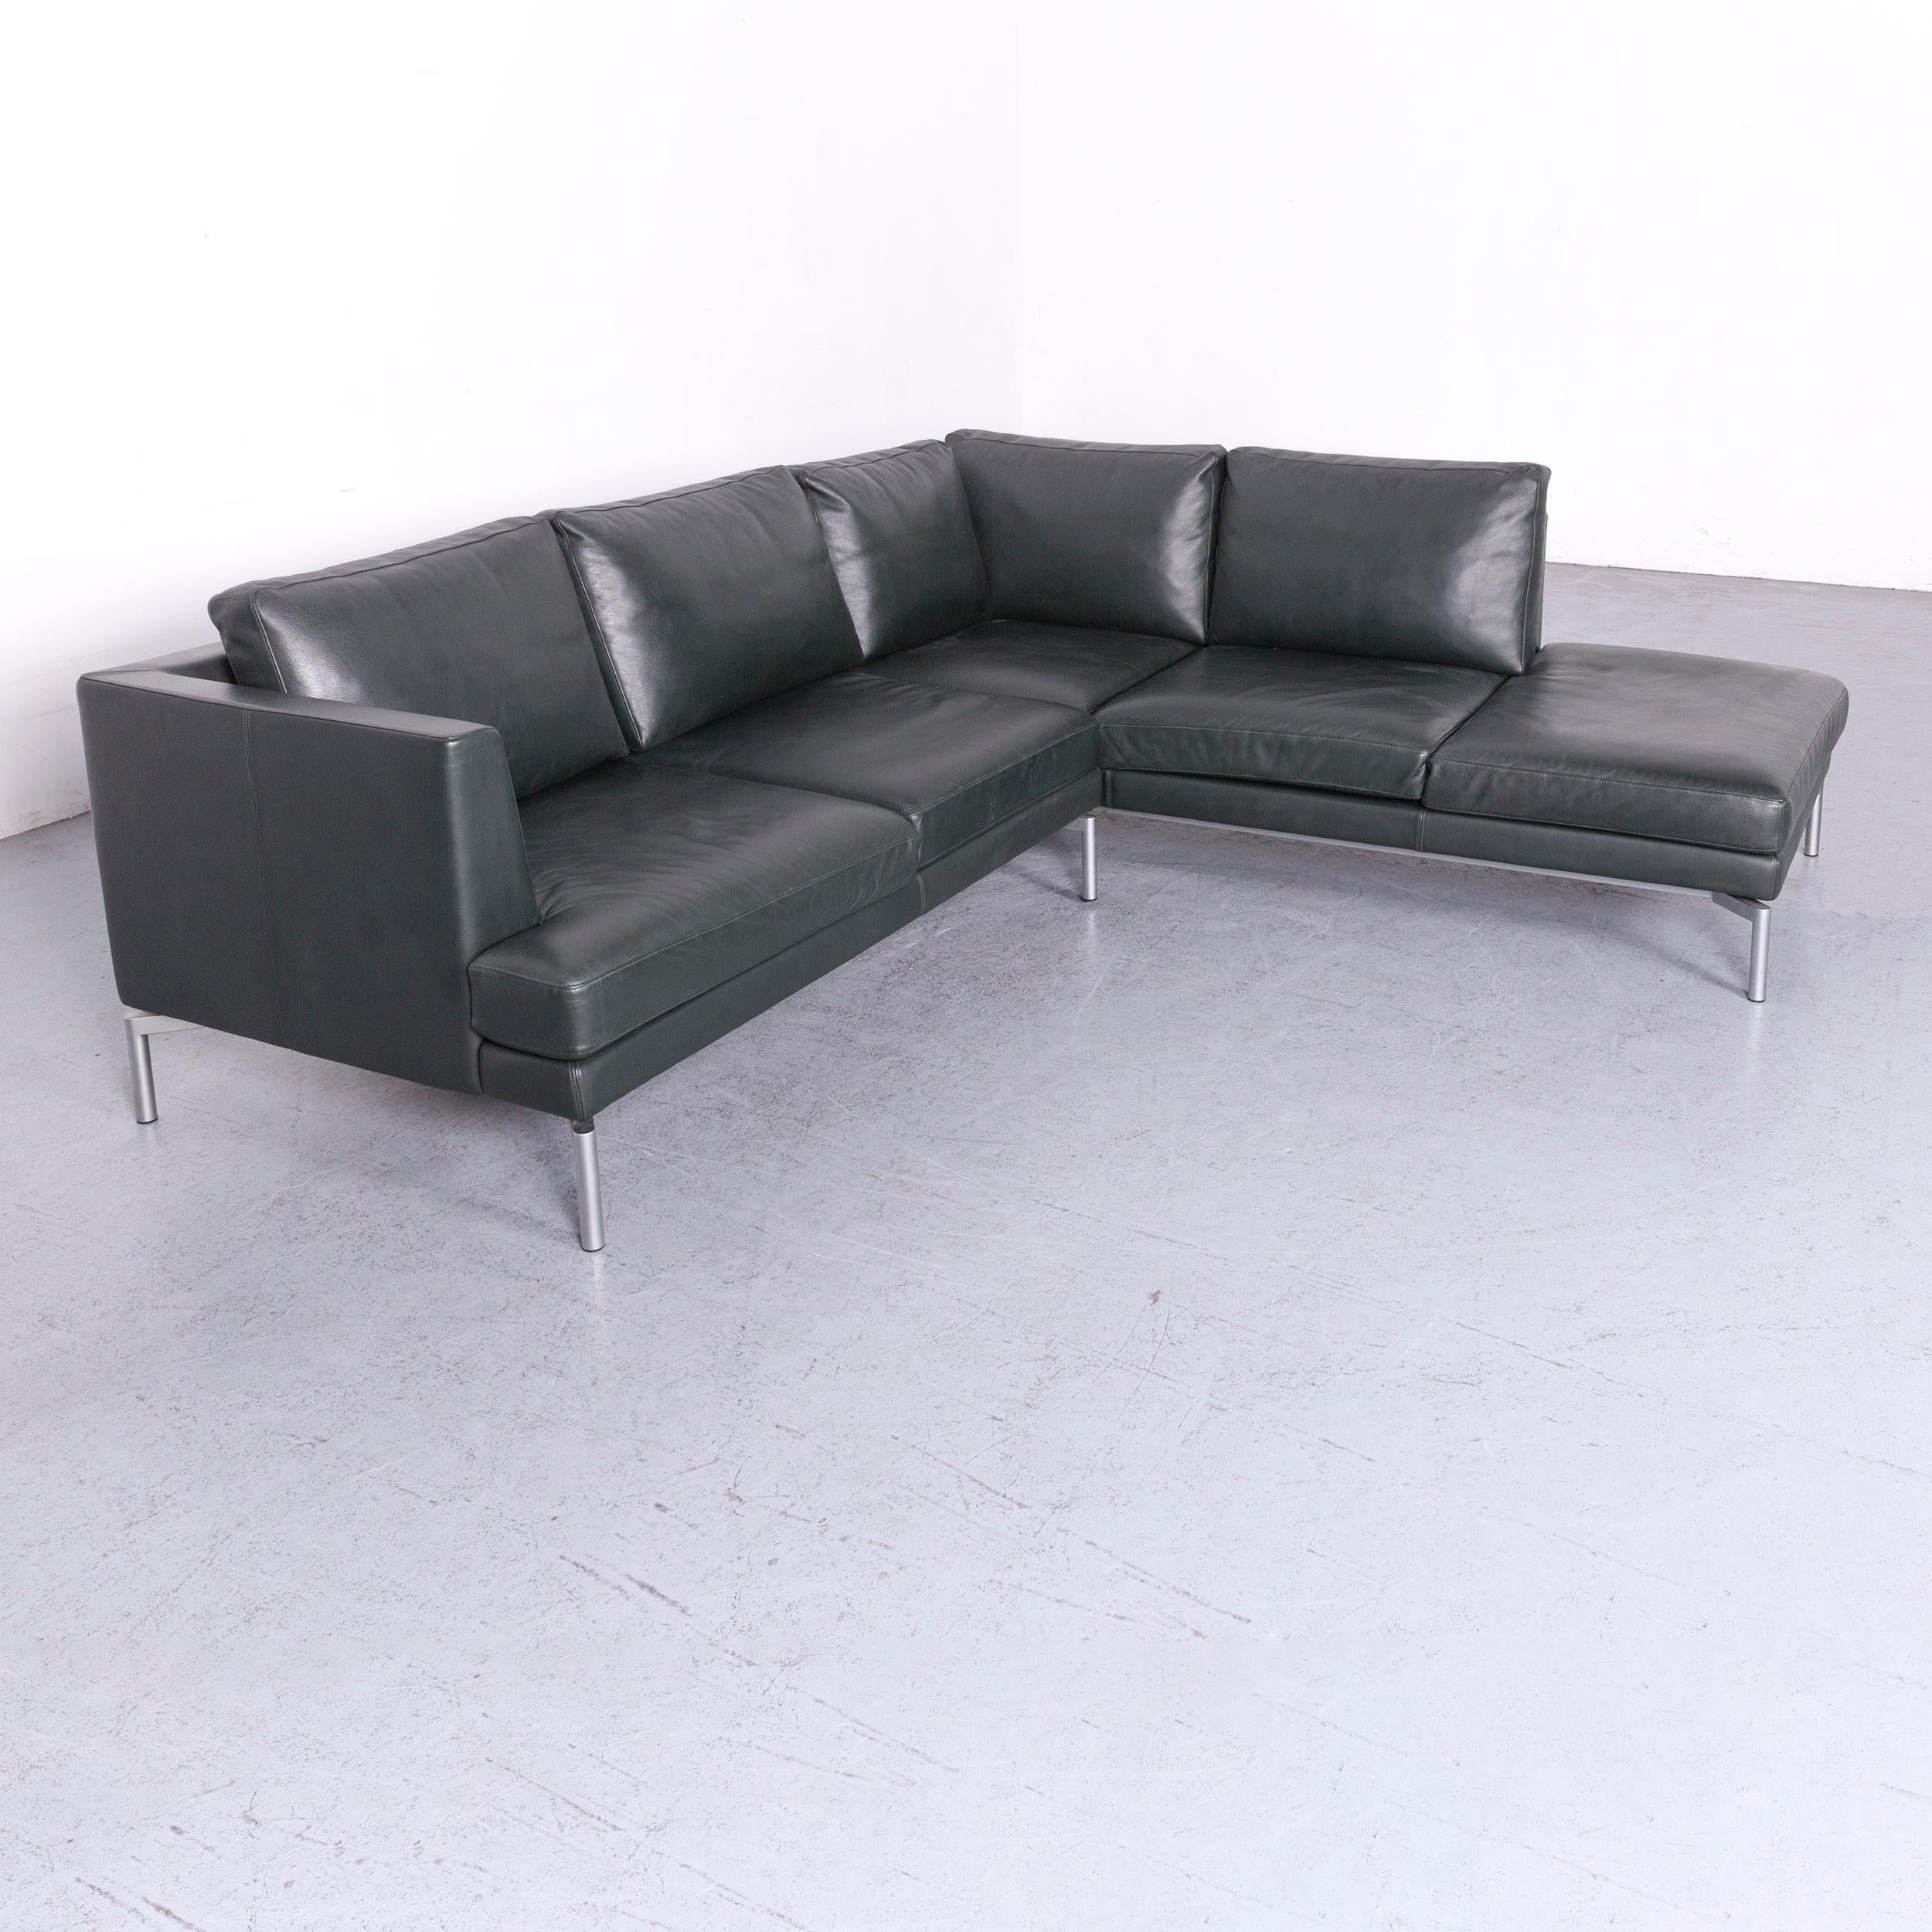 We bring to you a Walter Knoll designer leather sofa green corner couch.

































 